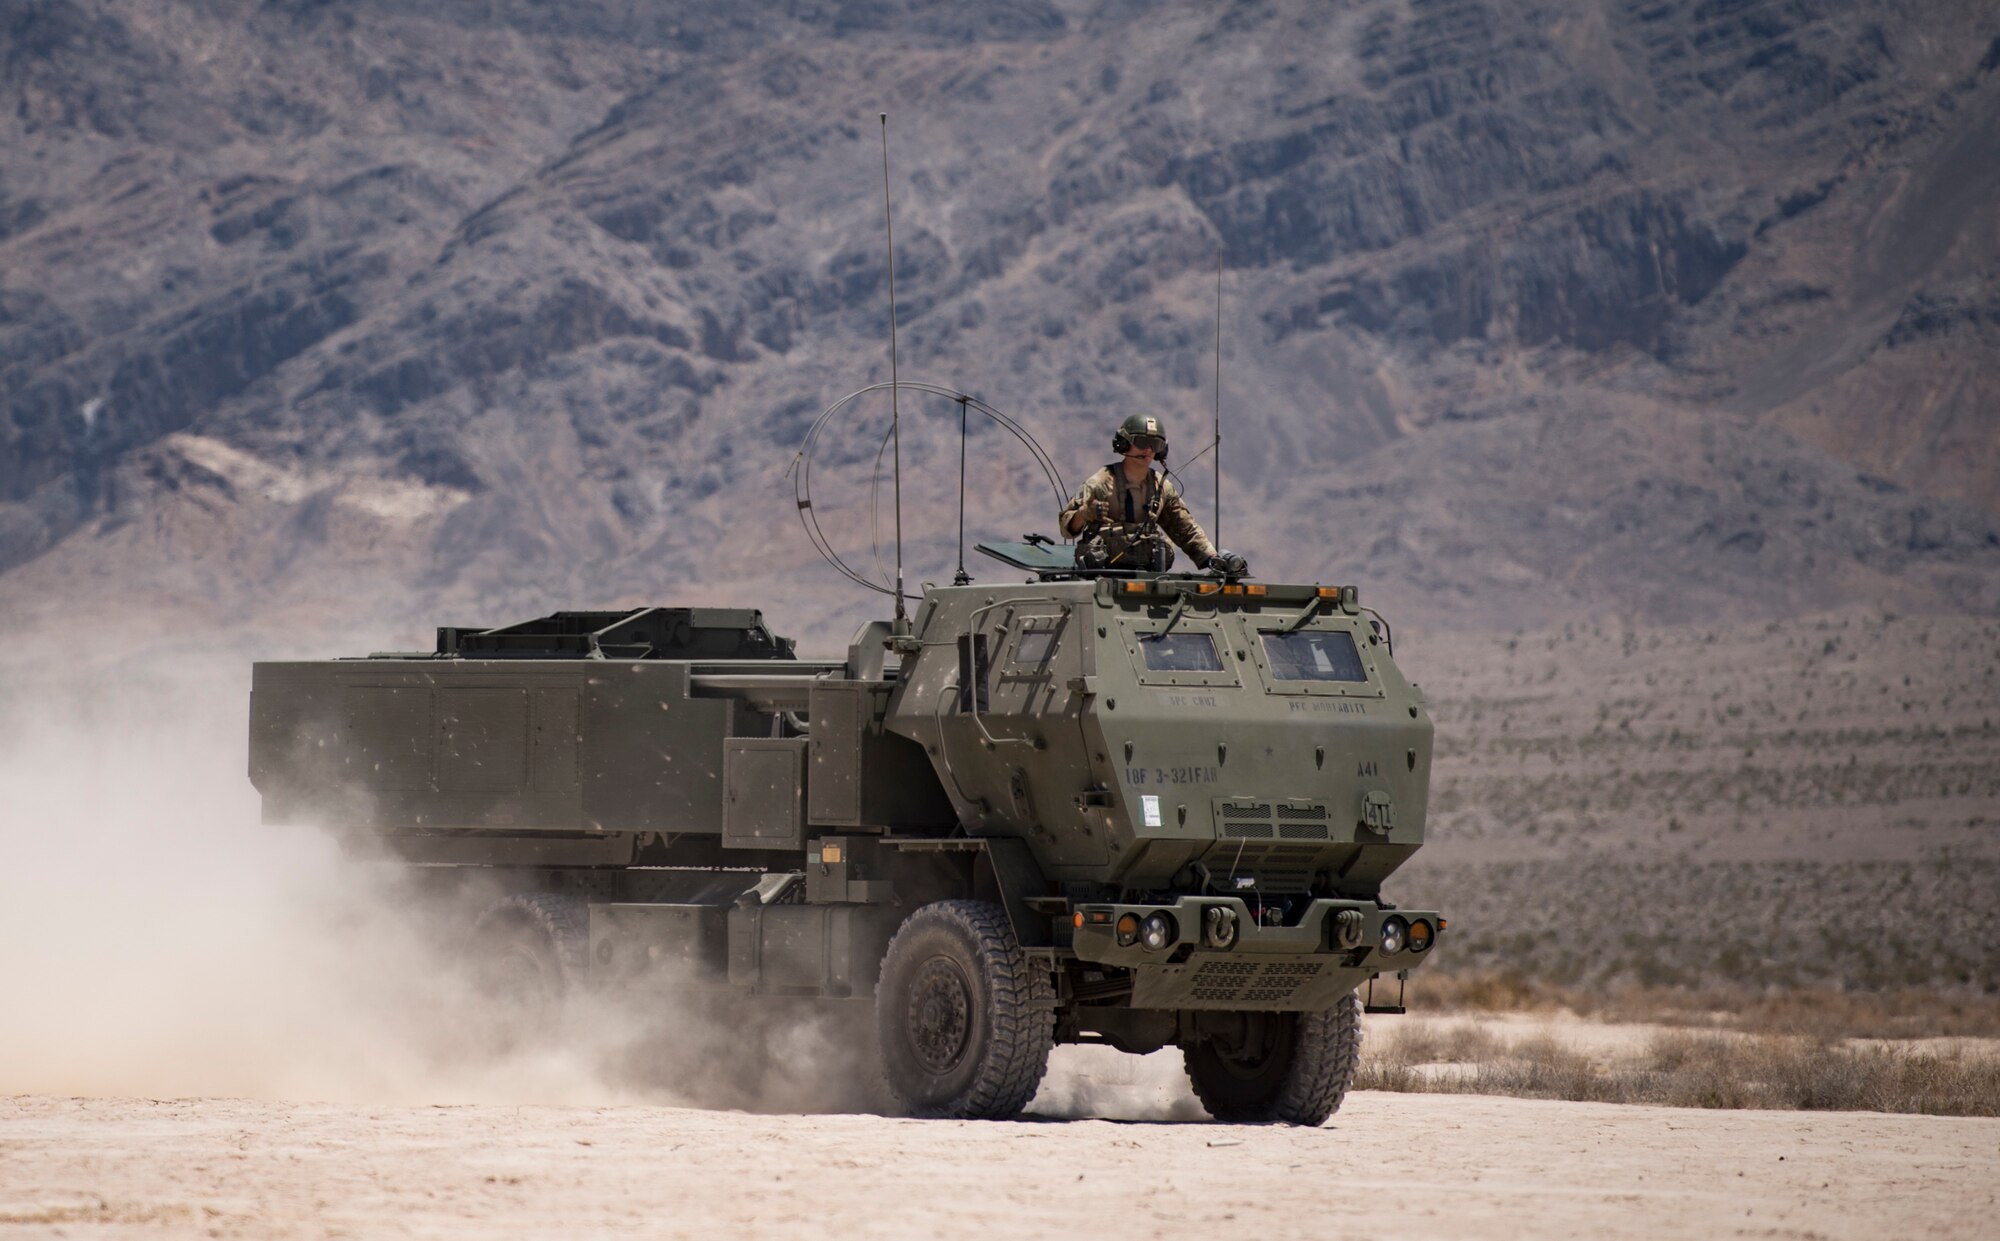 An M142 High Mobility Artillery Rocket System (HIMARS) assigned to 3rd Battalion, 321st Field Artillery Regiment, Fort Bragg, North Carolina, travels on the Nevada Test and Training Range June 9, 2018. The HIMARS is typically operated by a crew made up of a driver, gunner, and launcher chief. (U.S. Air Force photo by Airman 1st Class Andrew D. Sarver)